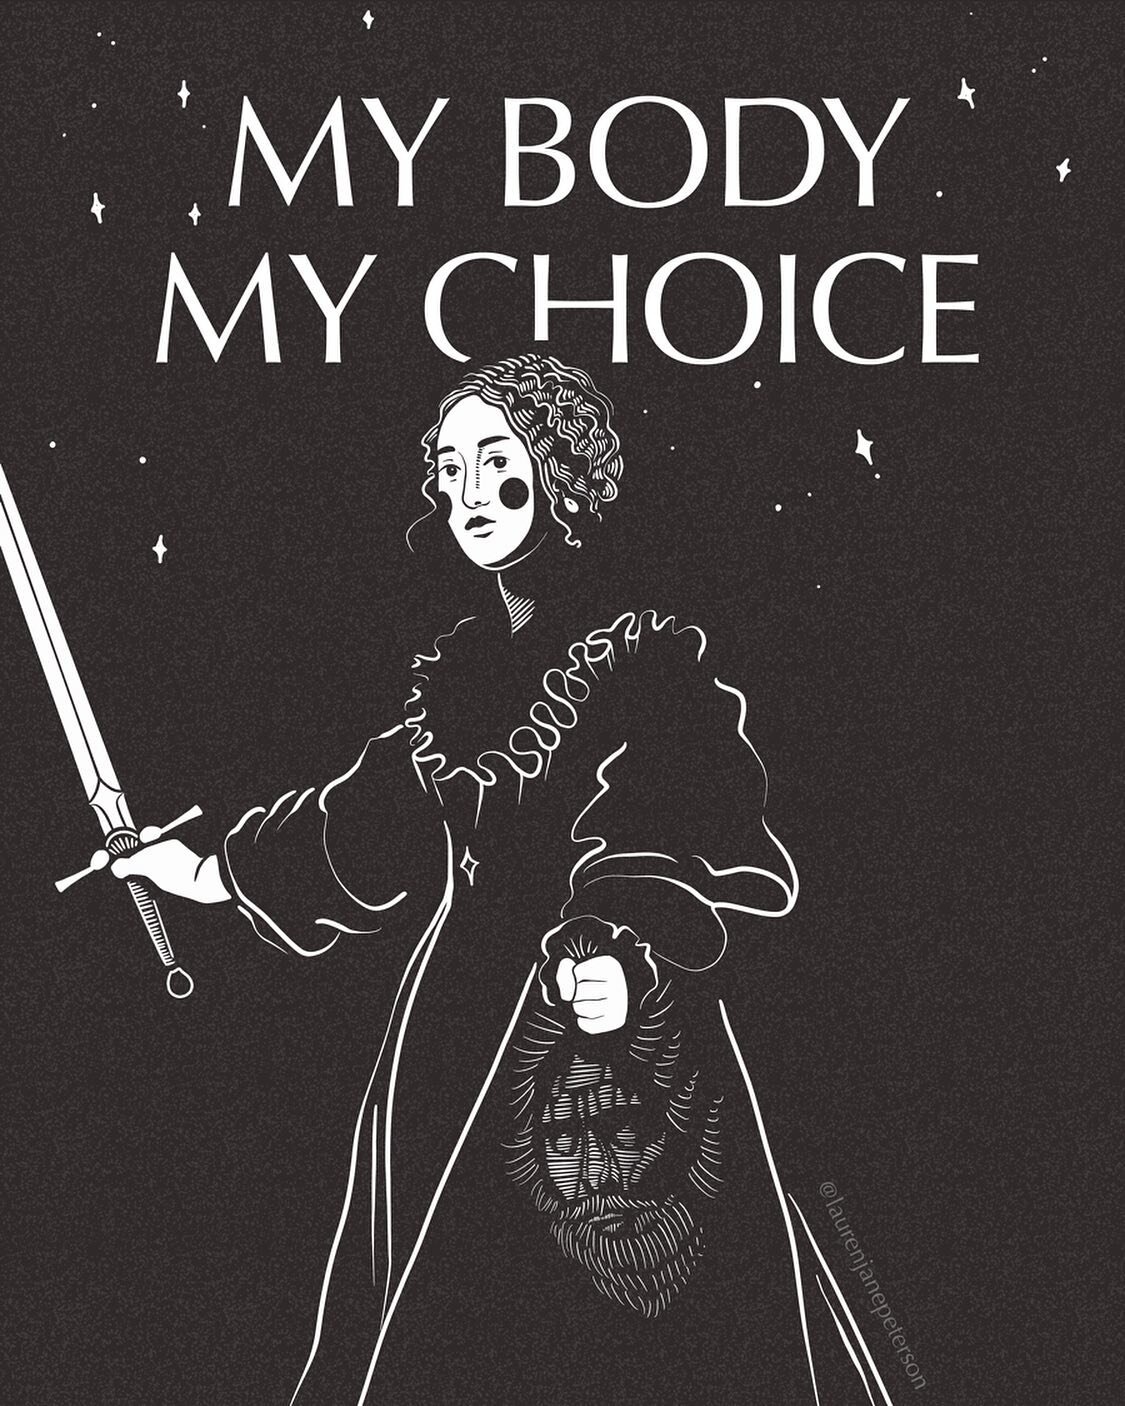 It&rsquo;s time Judith joins the party. #mybodymychoice